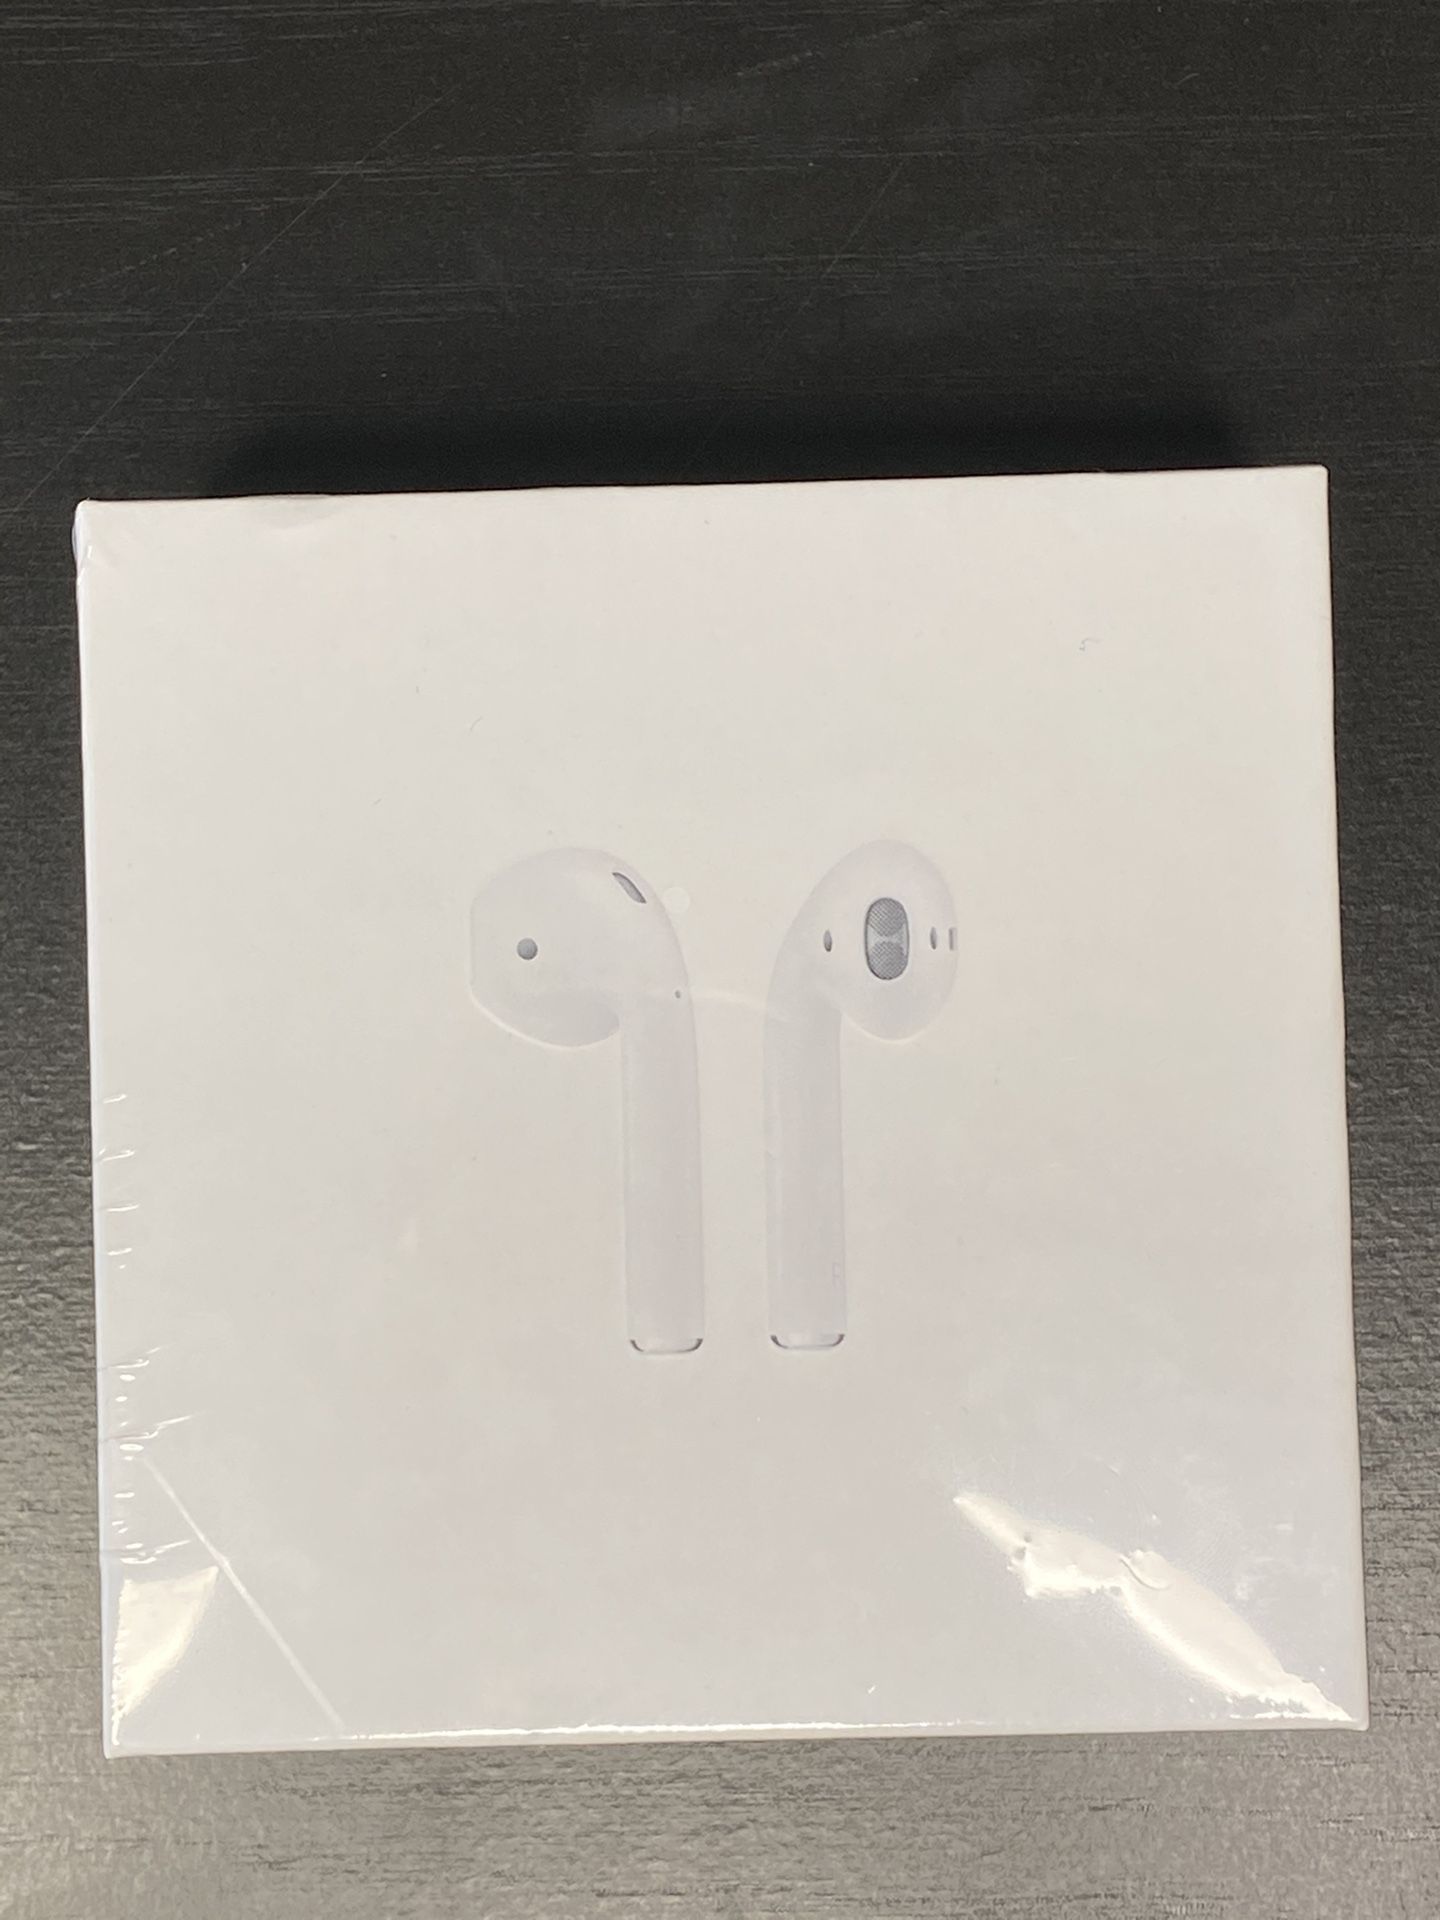 BRAND NEW Generation Two AirPods. 